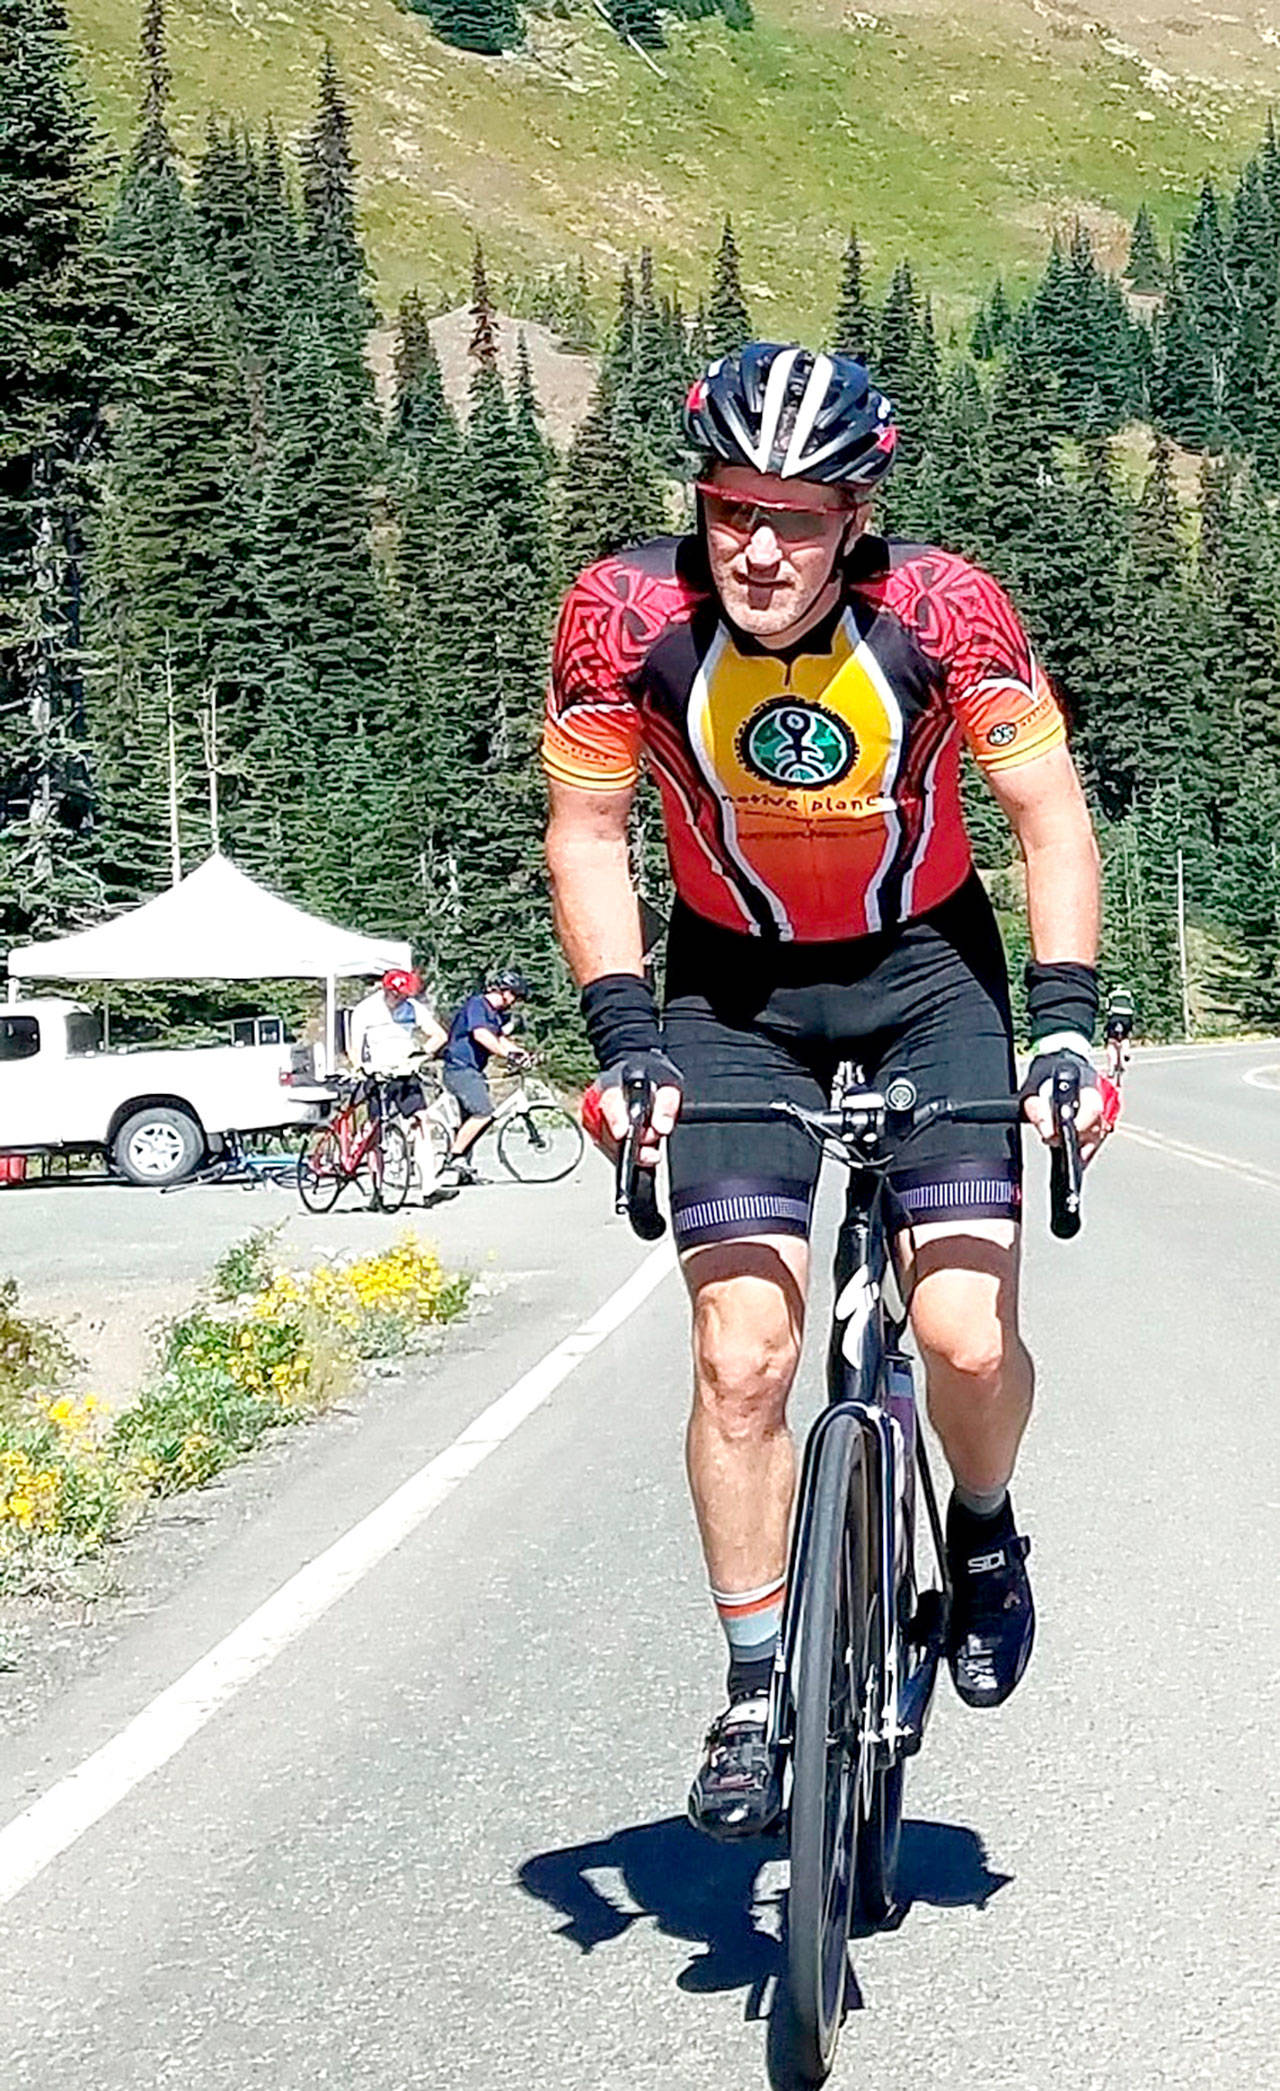 Photo courtesy of Mike Moreland/Ride the Hurricane The Ride the Hurricane event returns with as many as 800 riders going up Hurricane Ridge Road Sunday morning and another 200 doing a 100-mile ride on the northern Olympic Peninsula.